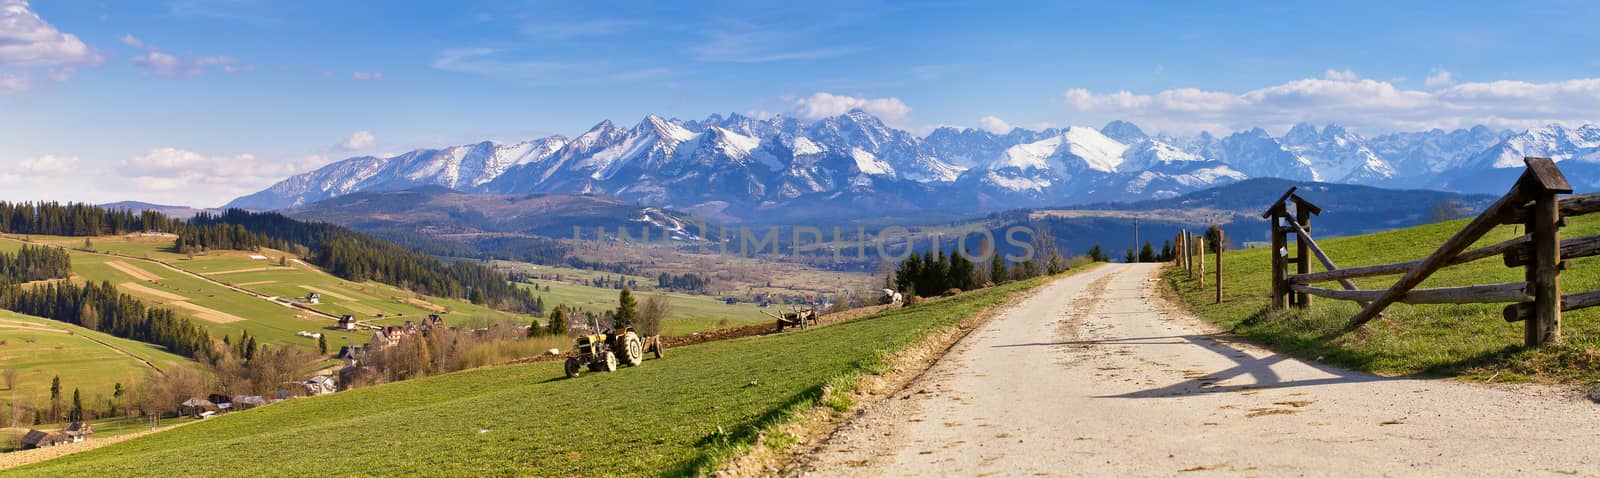 South Poland Panorama with snowy Tatra mountains in spring,  by weise_maxim